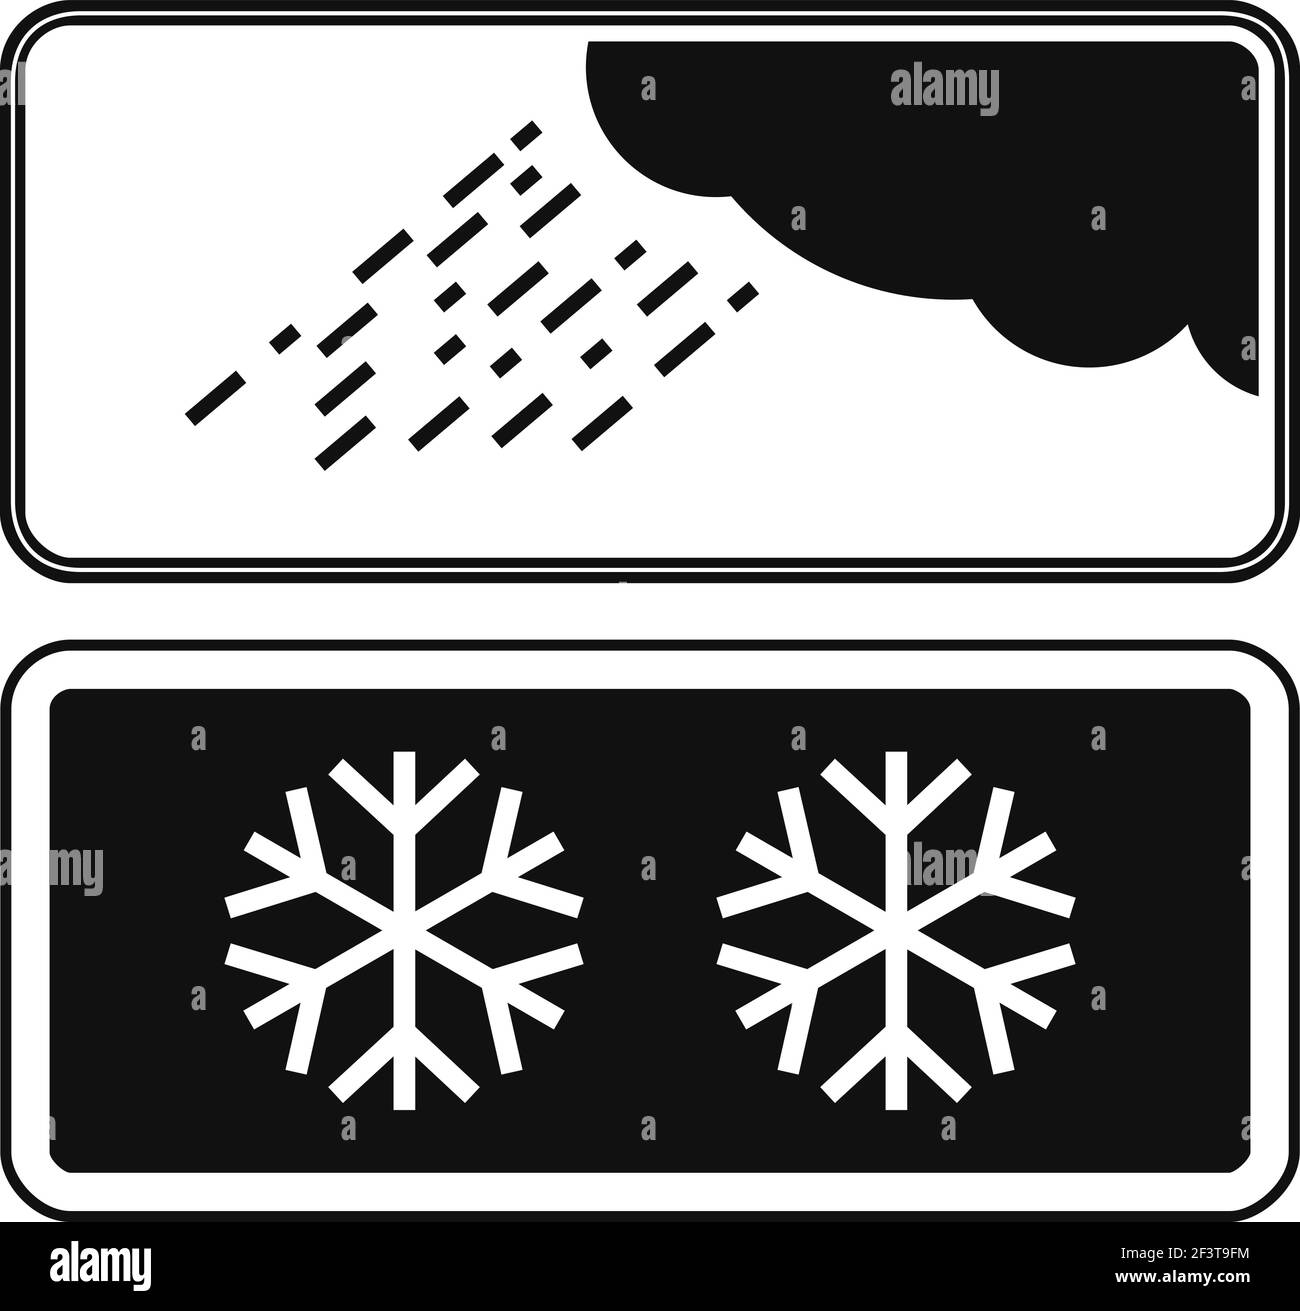 Rectangular complementary panels with snow and rain icons, isolated on white background. Stock Vector